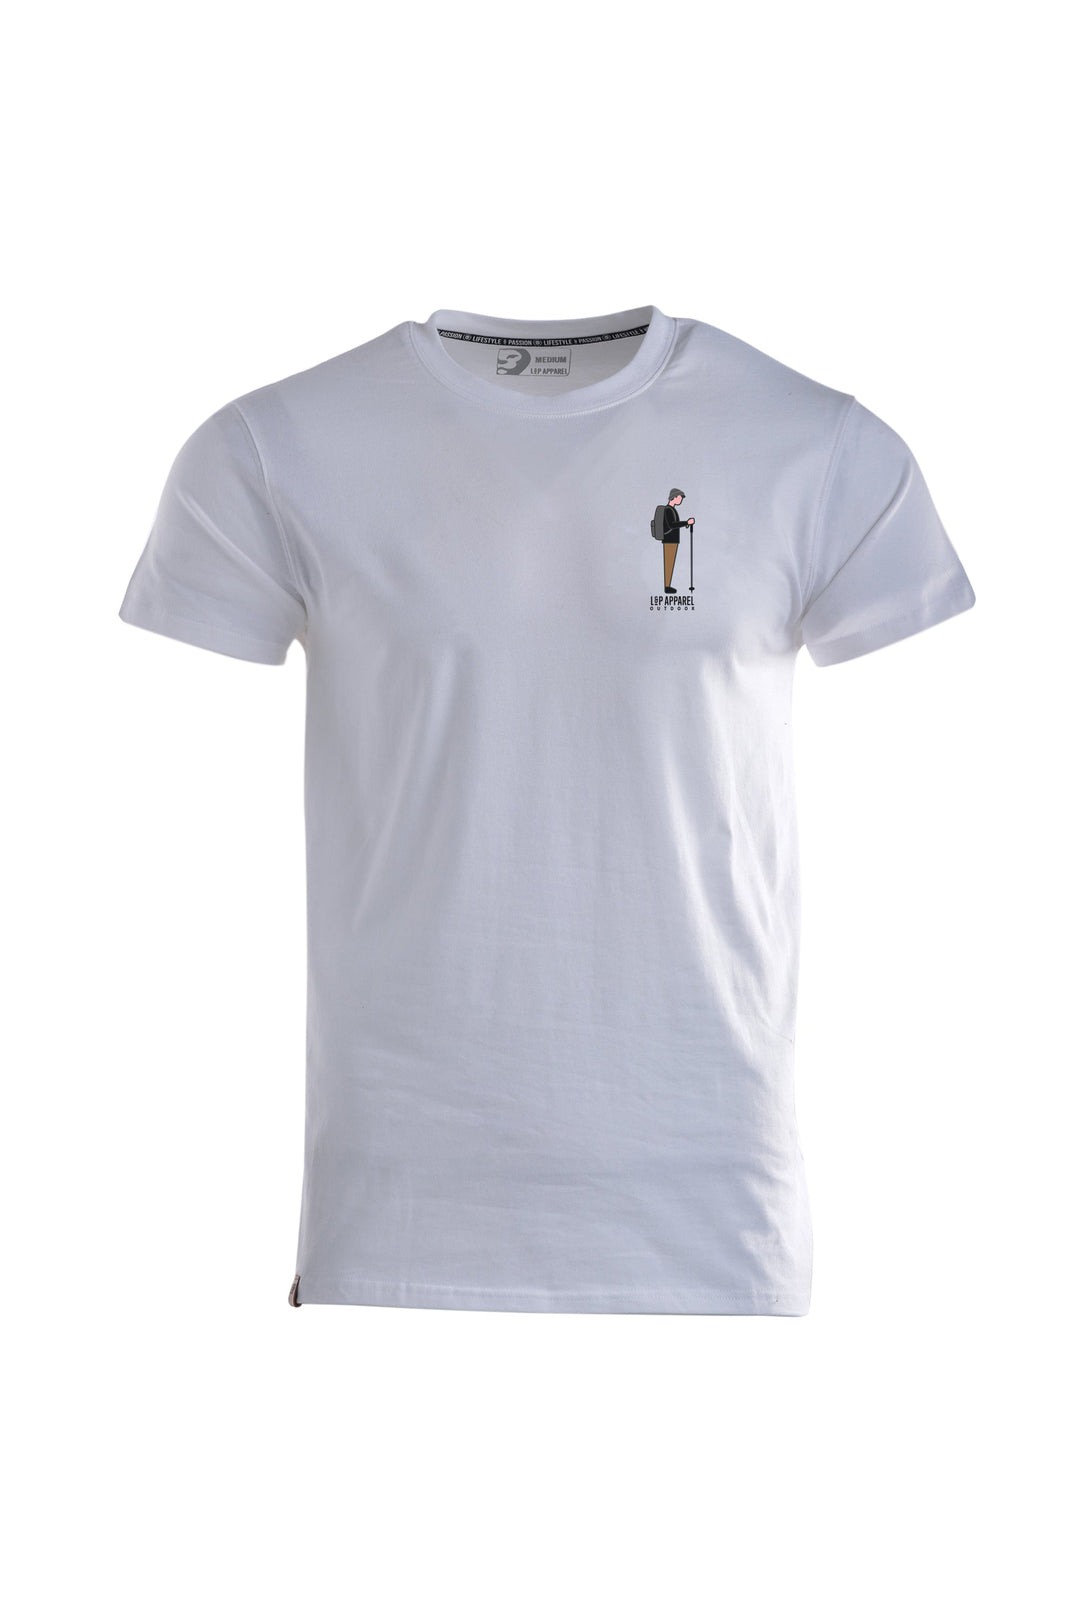 Cotton short-sleeved t-shirts